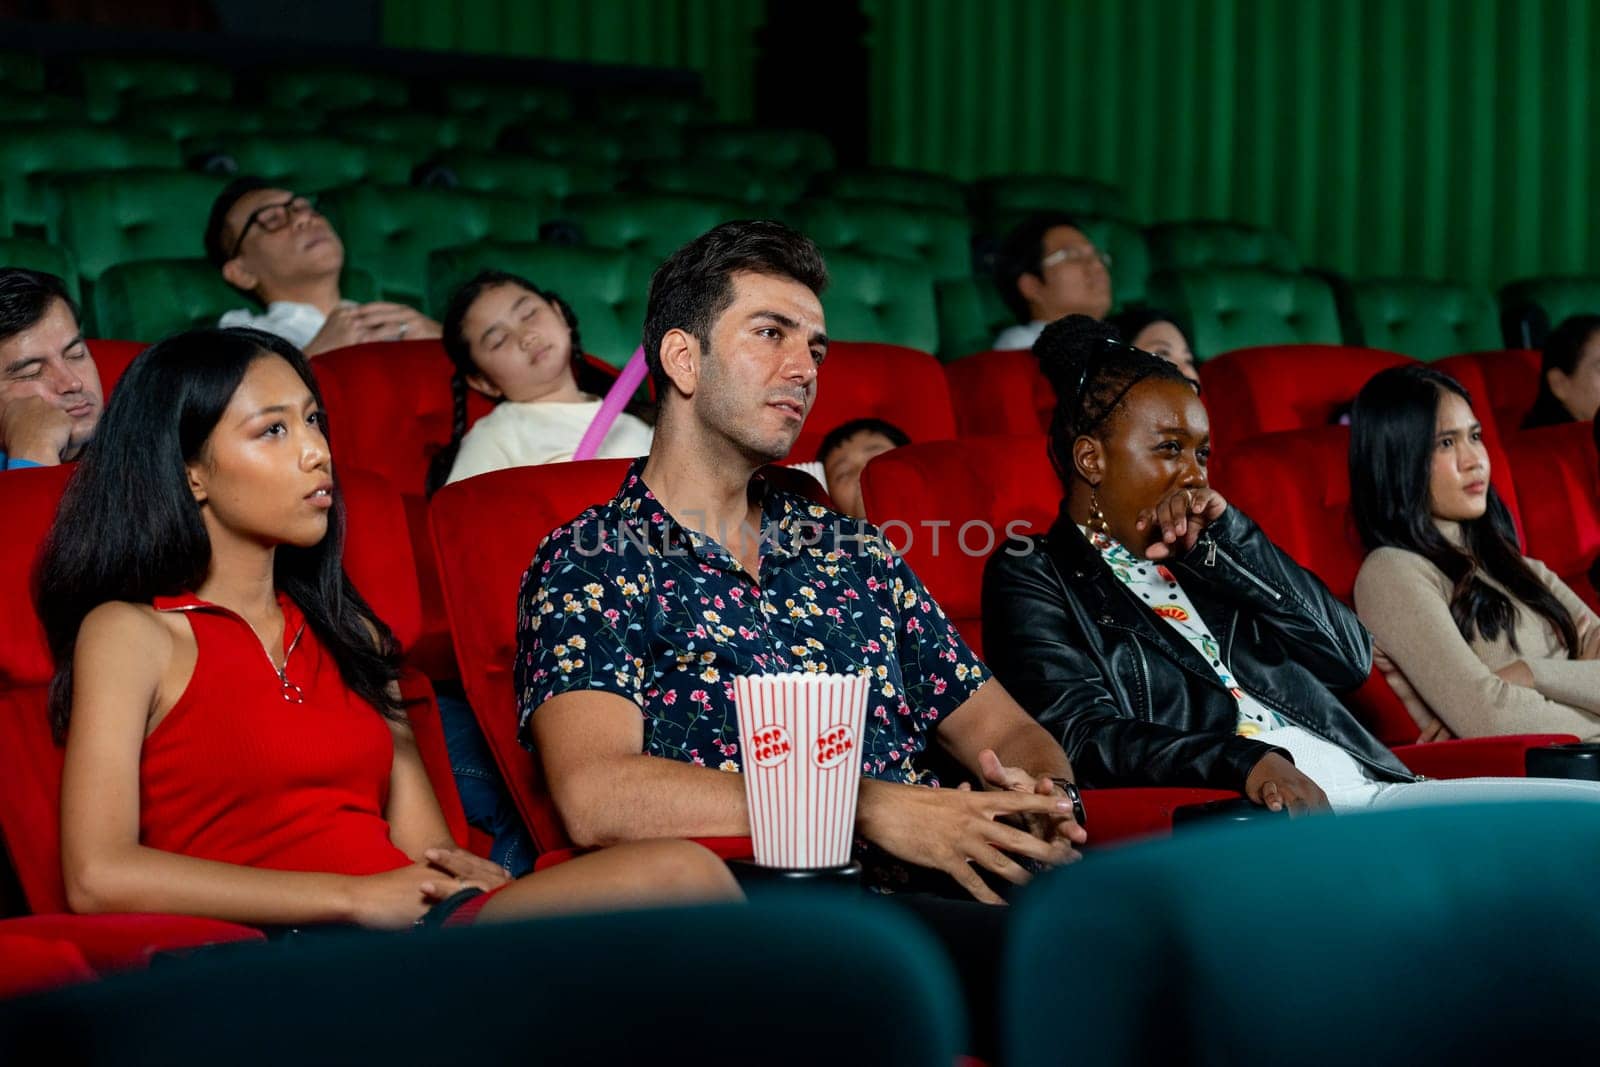 Group of multiethic people sit on seats in cinema theater and they look boring during watch movie and someone sleep in the hall.